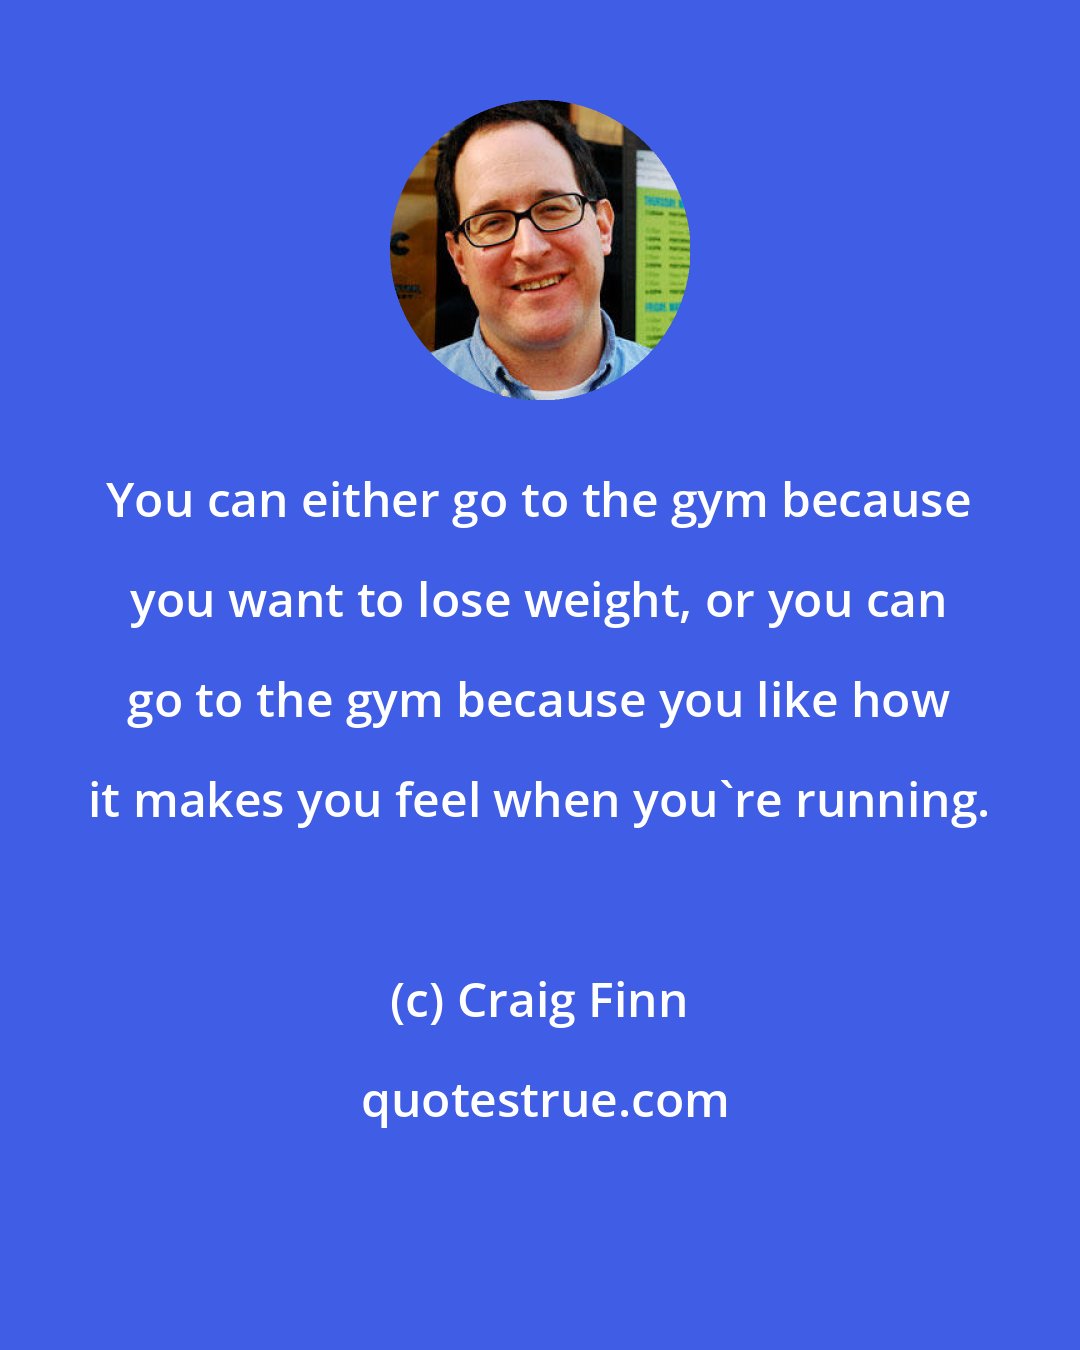 Craig Finn: You can either go to the gym because you want to lose weight, or you can go to the gym because you like how it makes you feel when you're running.